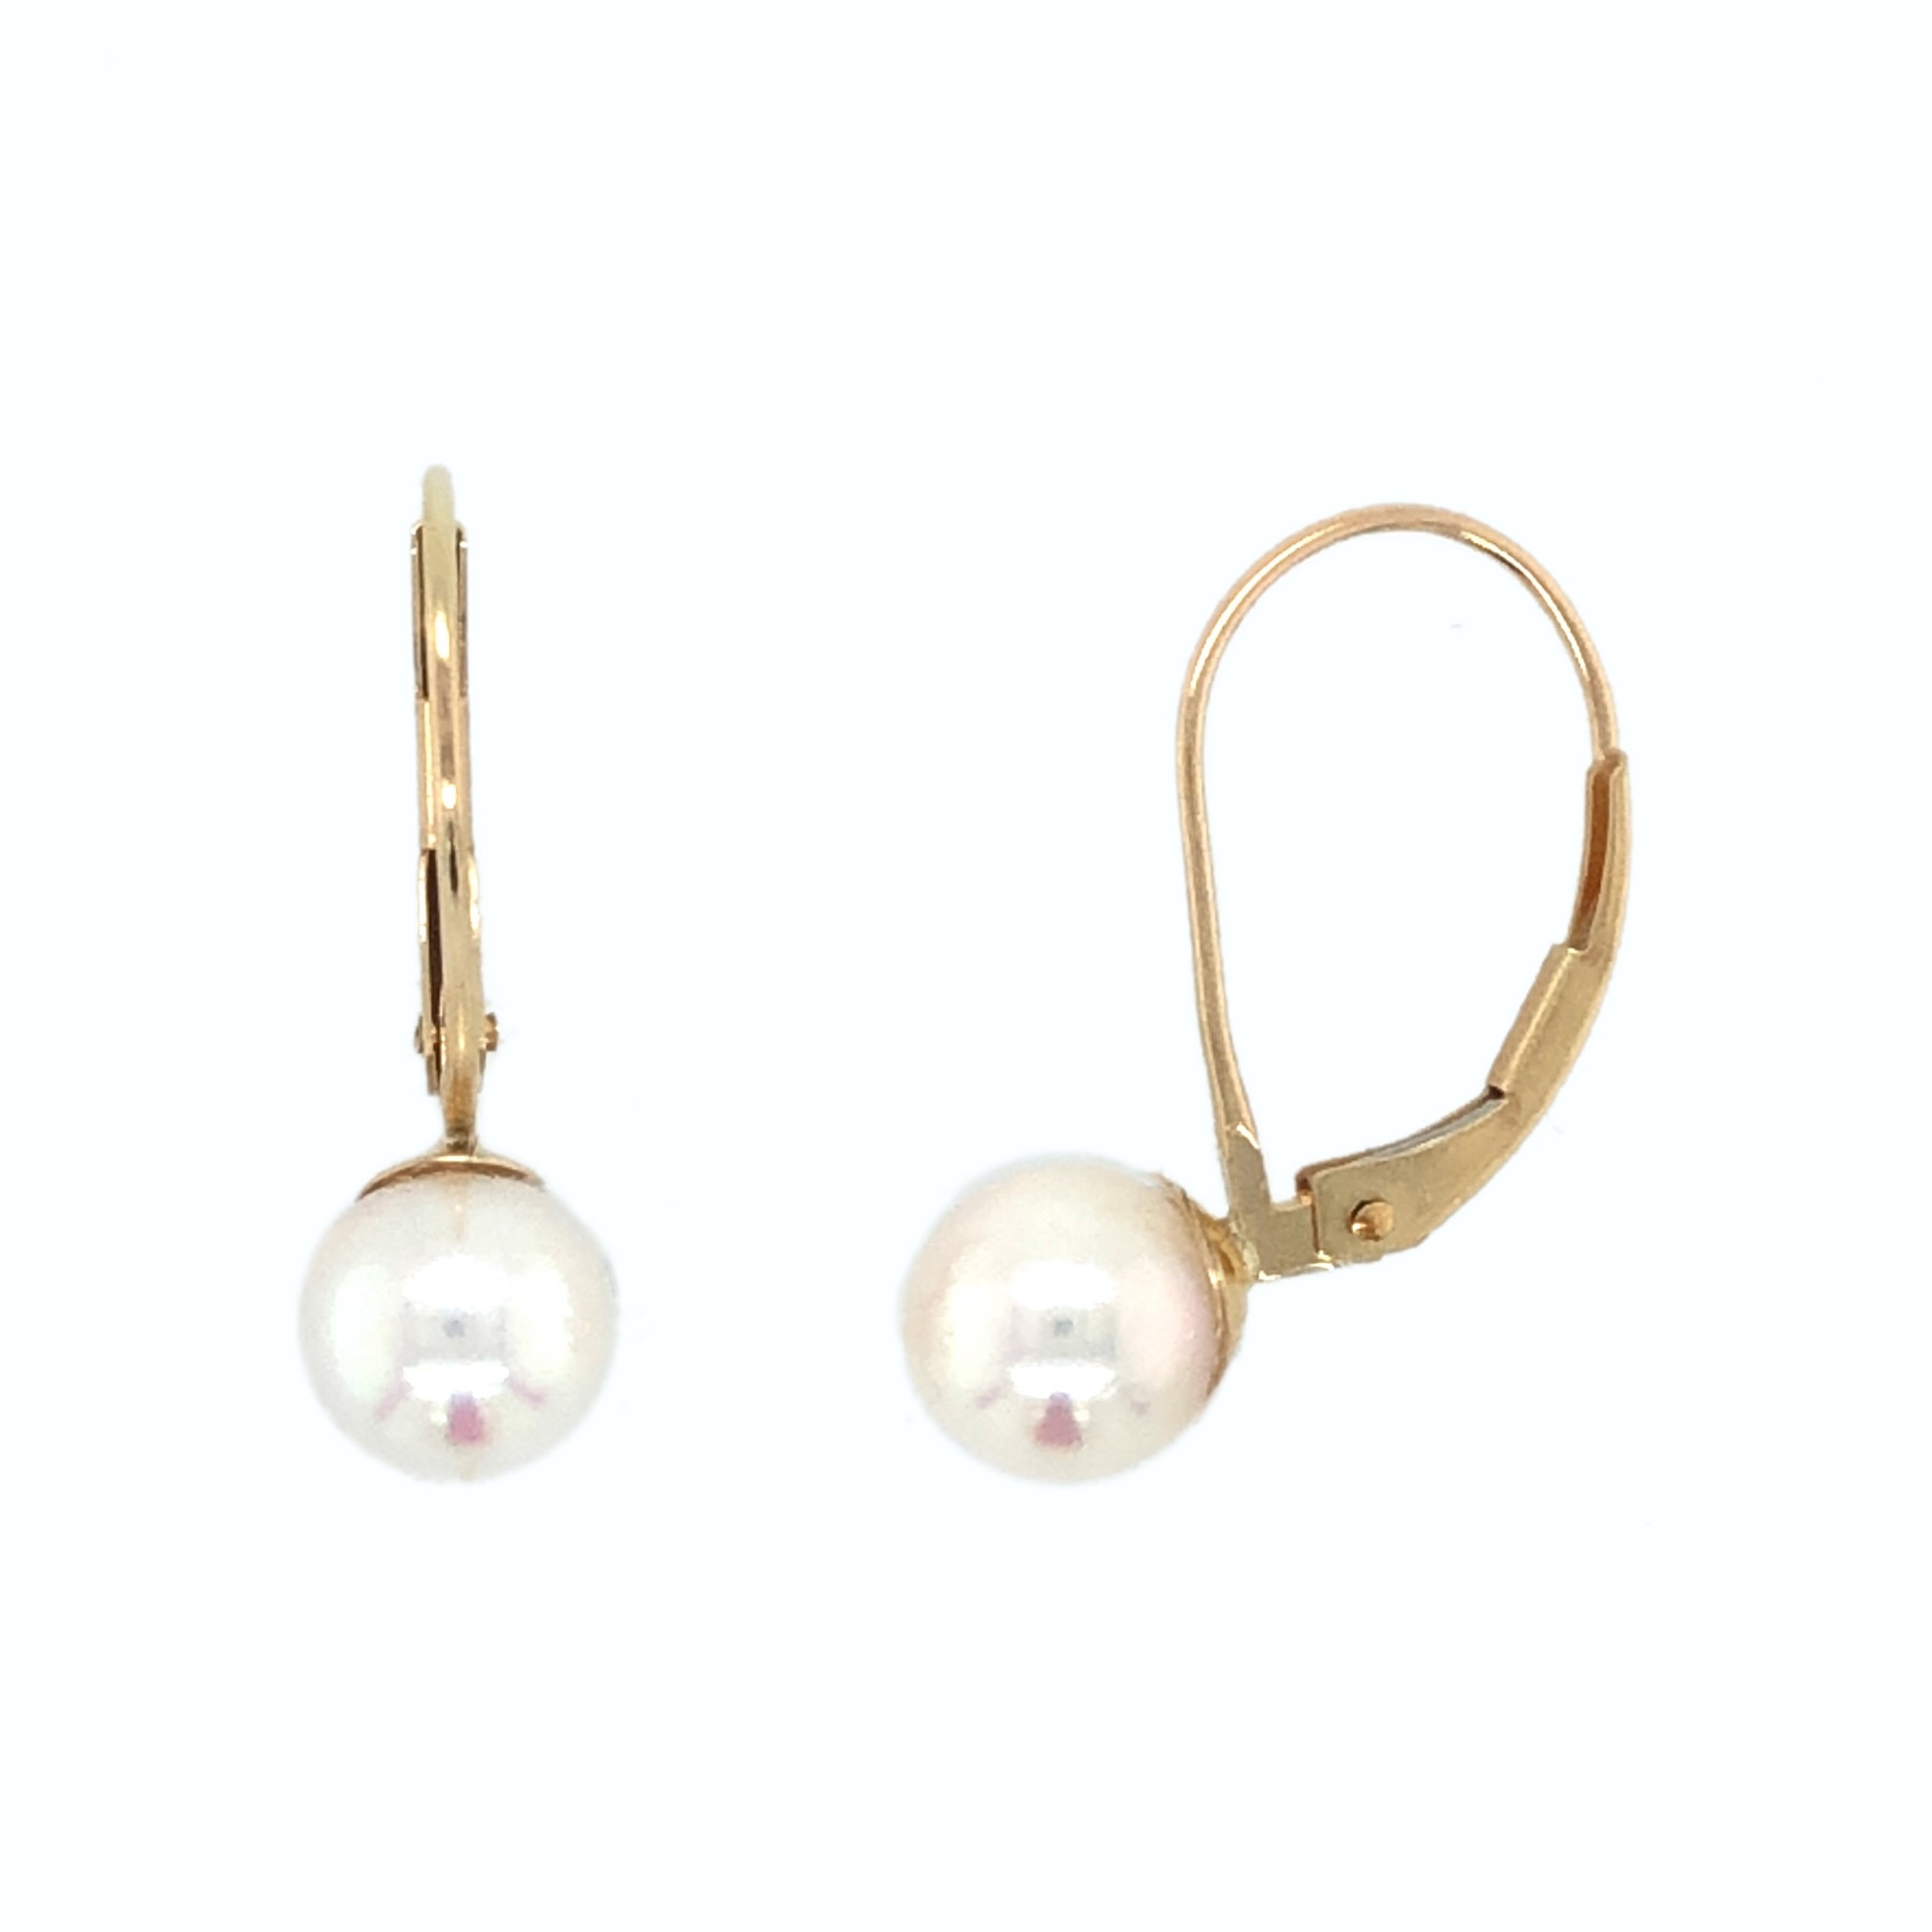 YELLOW GOLD CULTURED PEARL EARRINGS - Argo & Lehne Jewelers